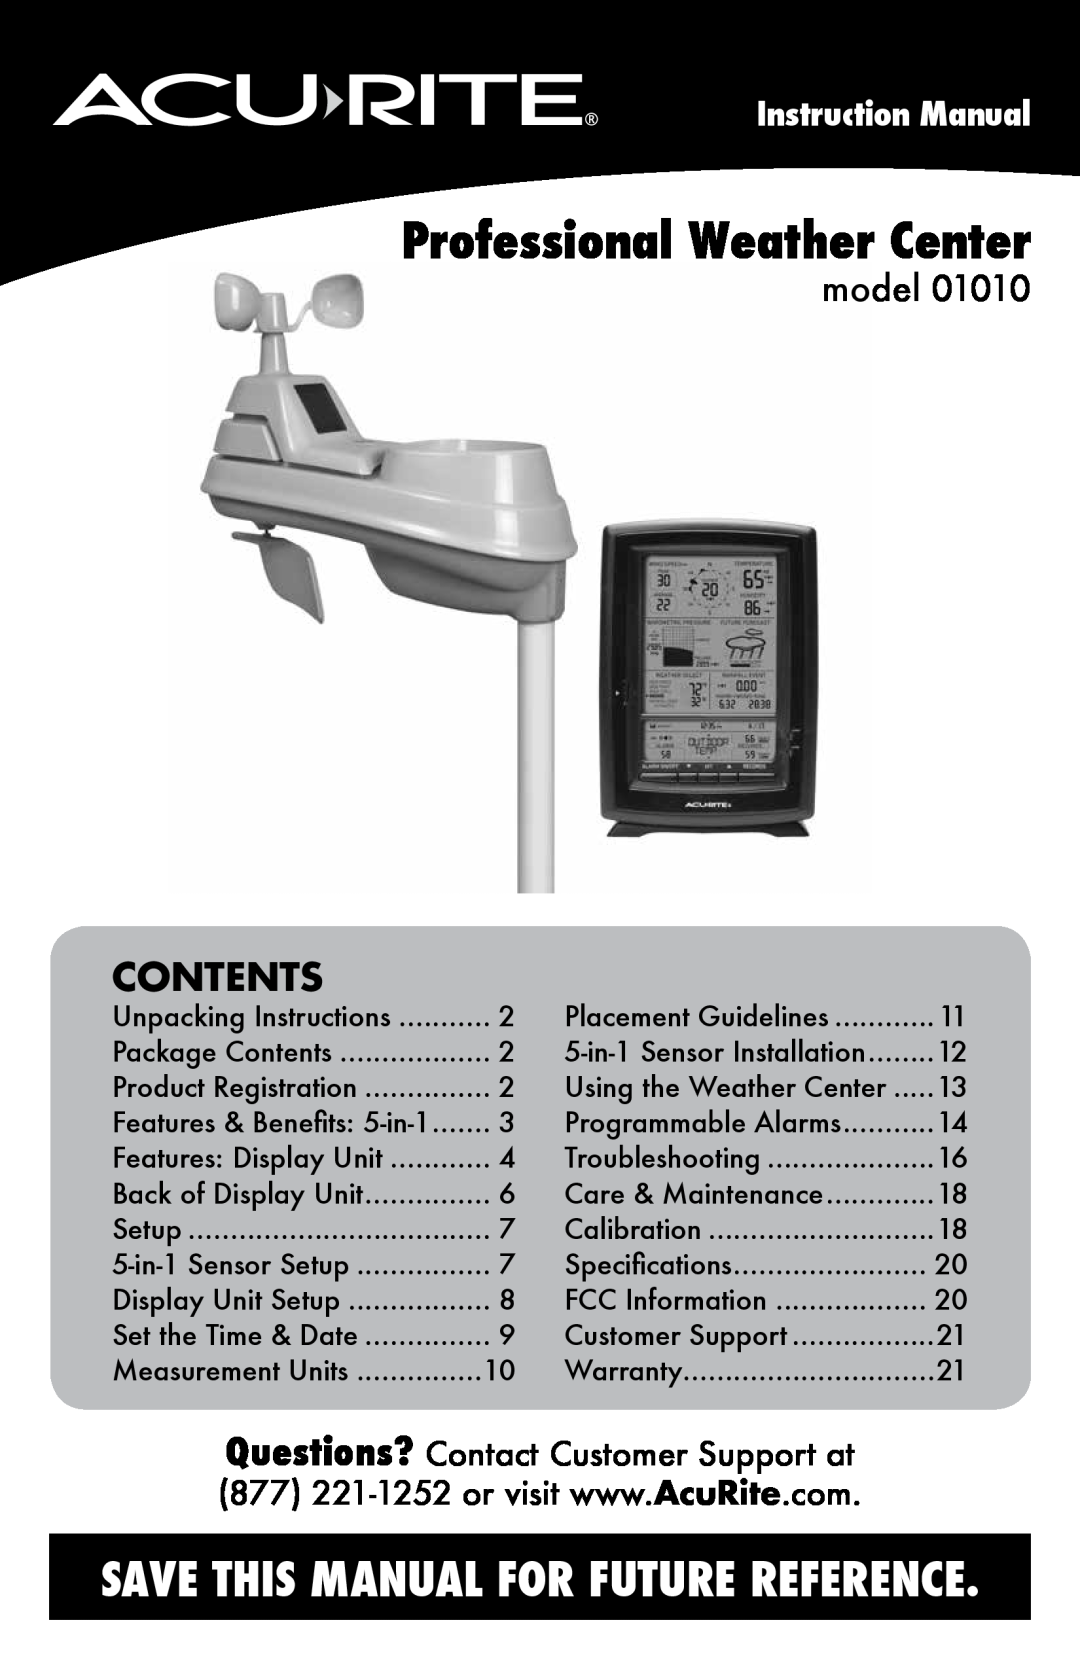 Acu-Rite 1010 instruction manual Contents, model, Professional Weather Center, Save This Manual For Future Reference 